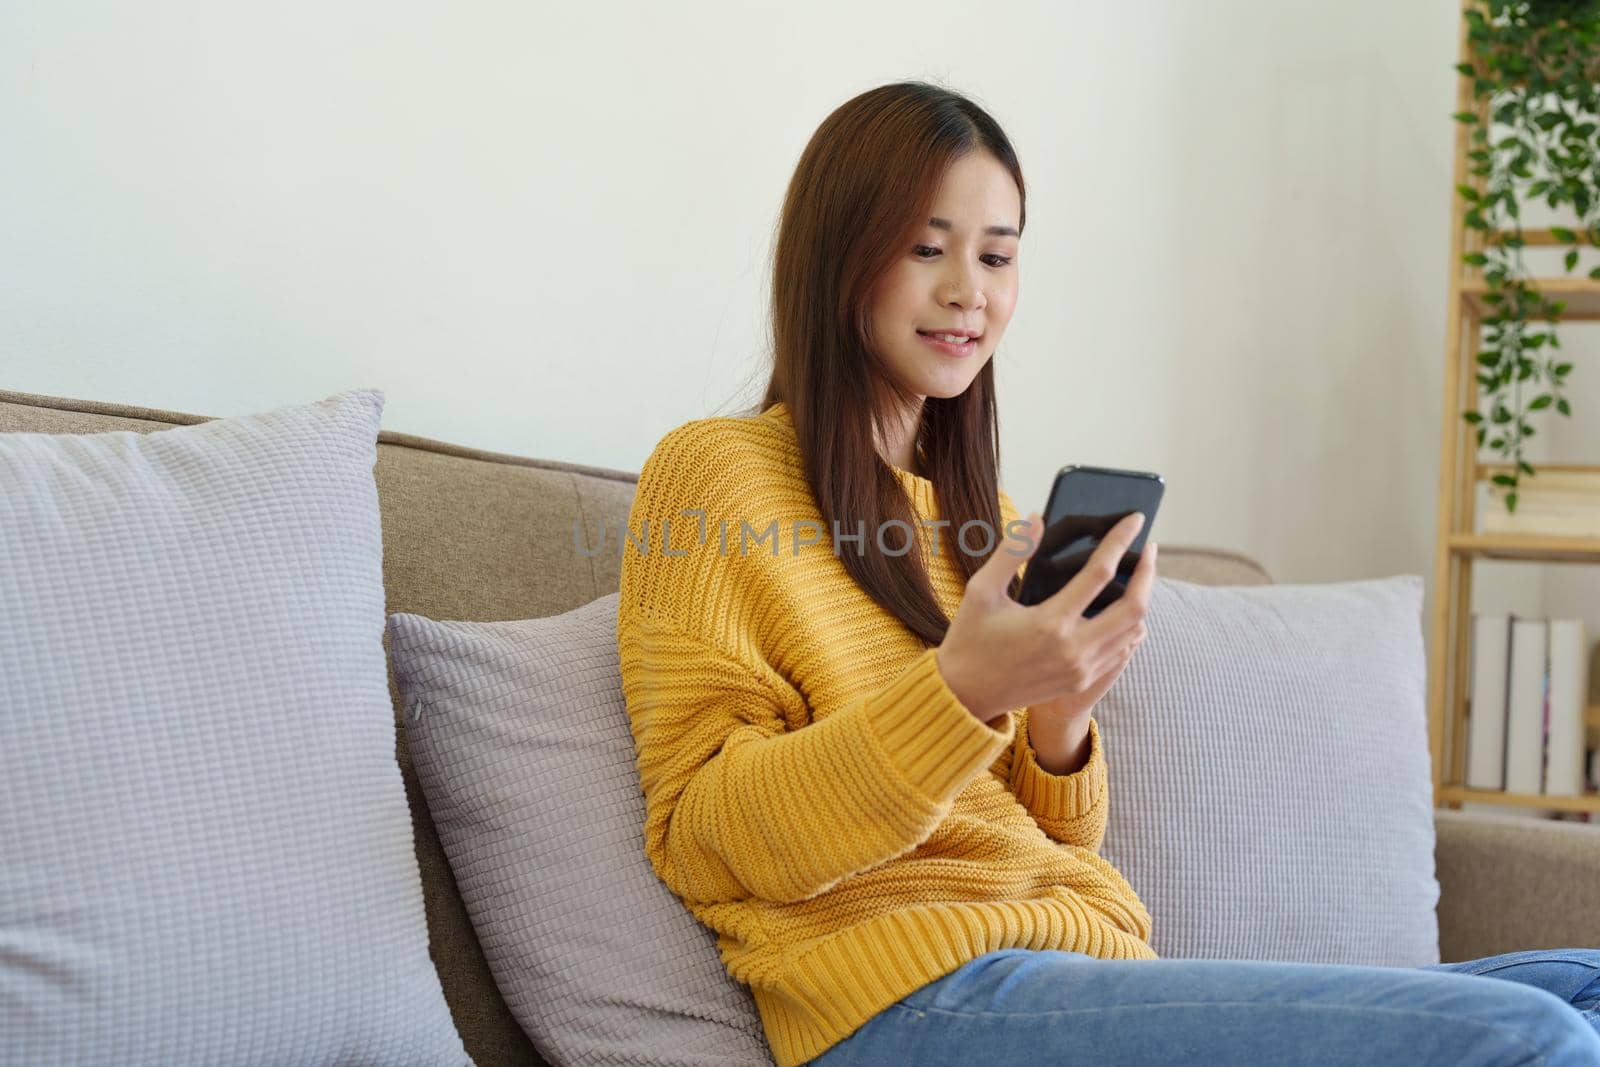 woman sitting on sofa at home ready to use mobile phone by Manastrong